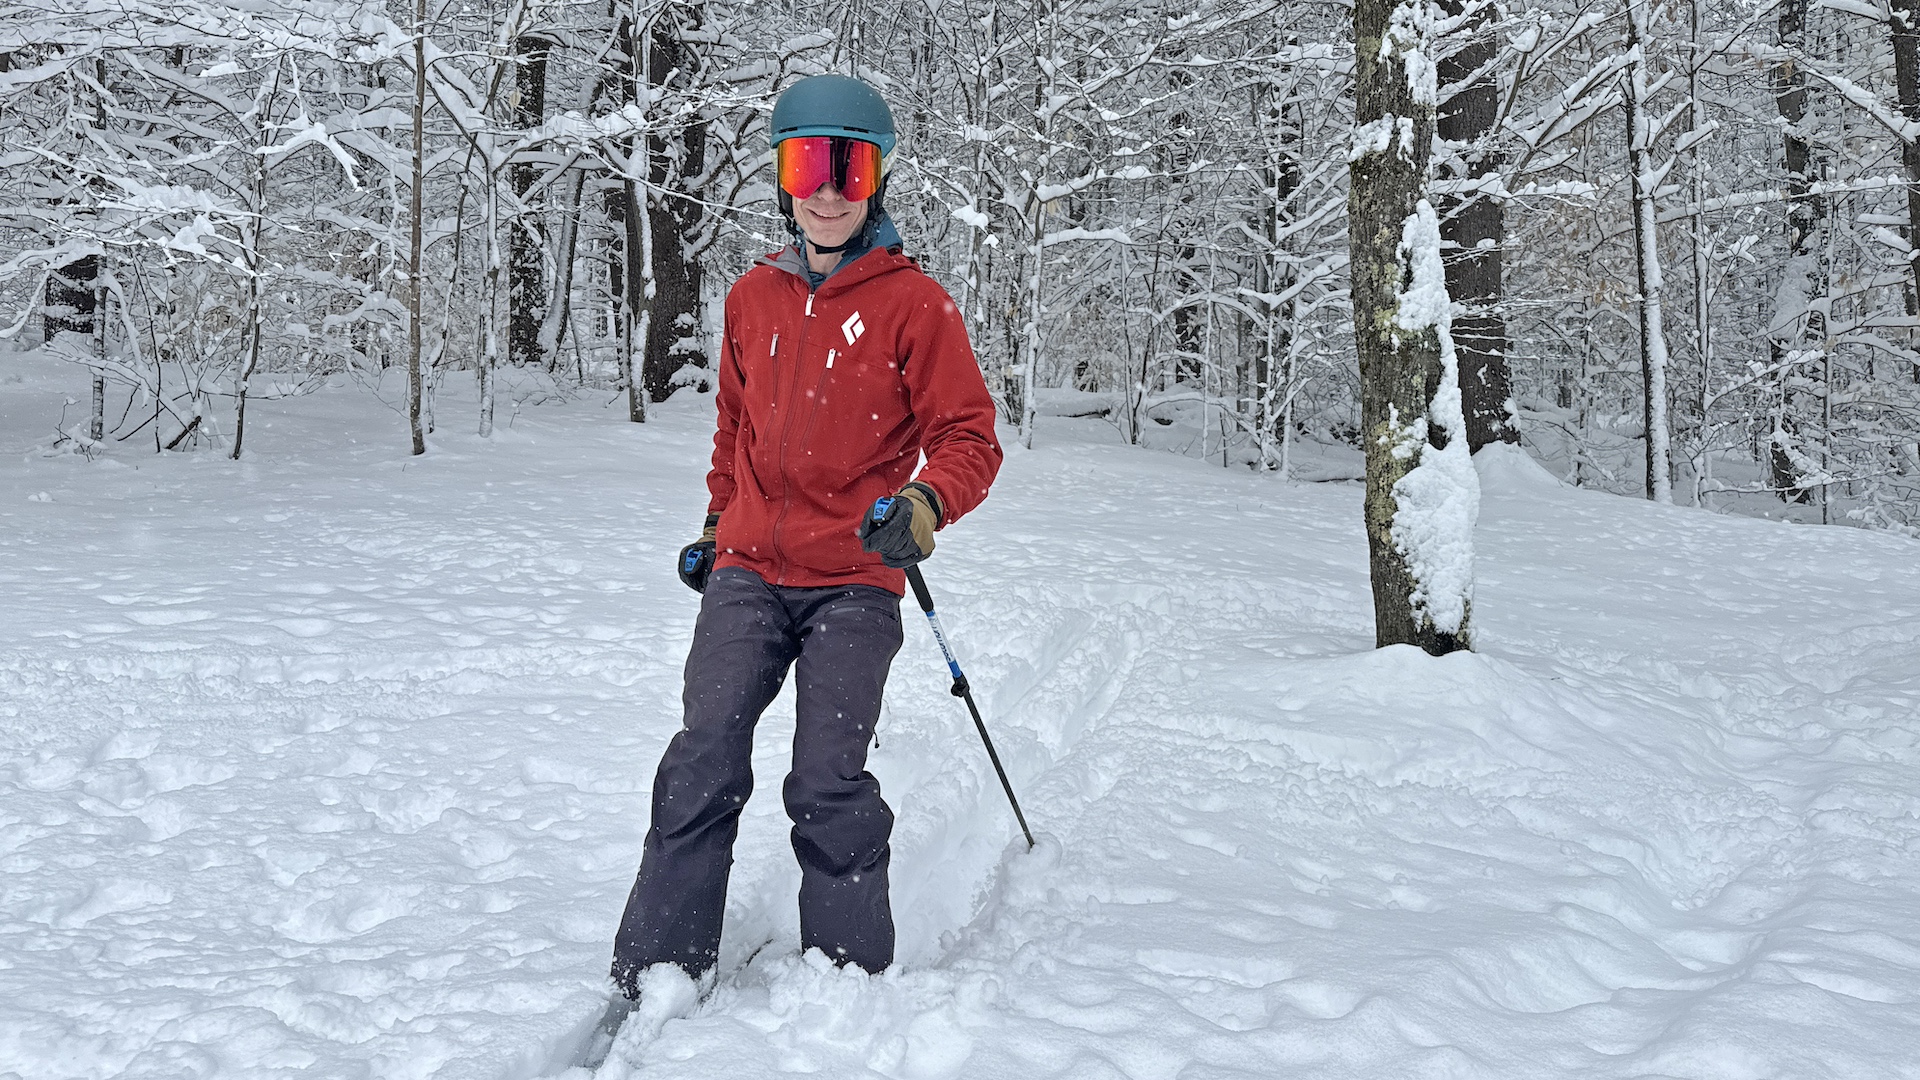 Skier wearing Goodr Snow G goggles